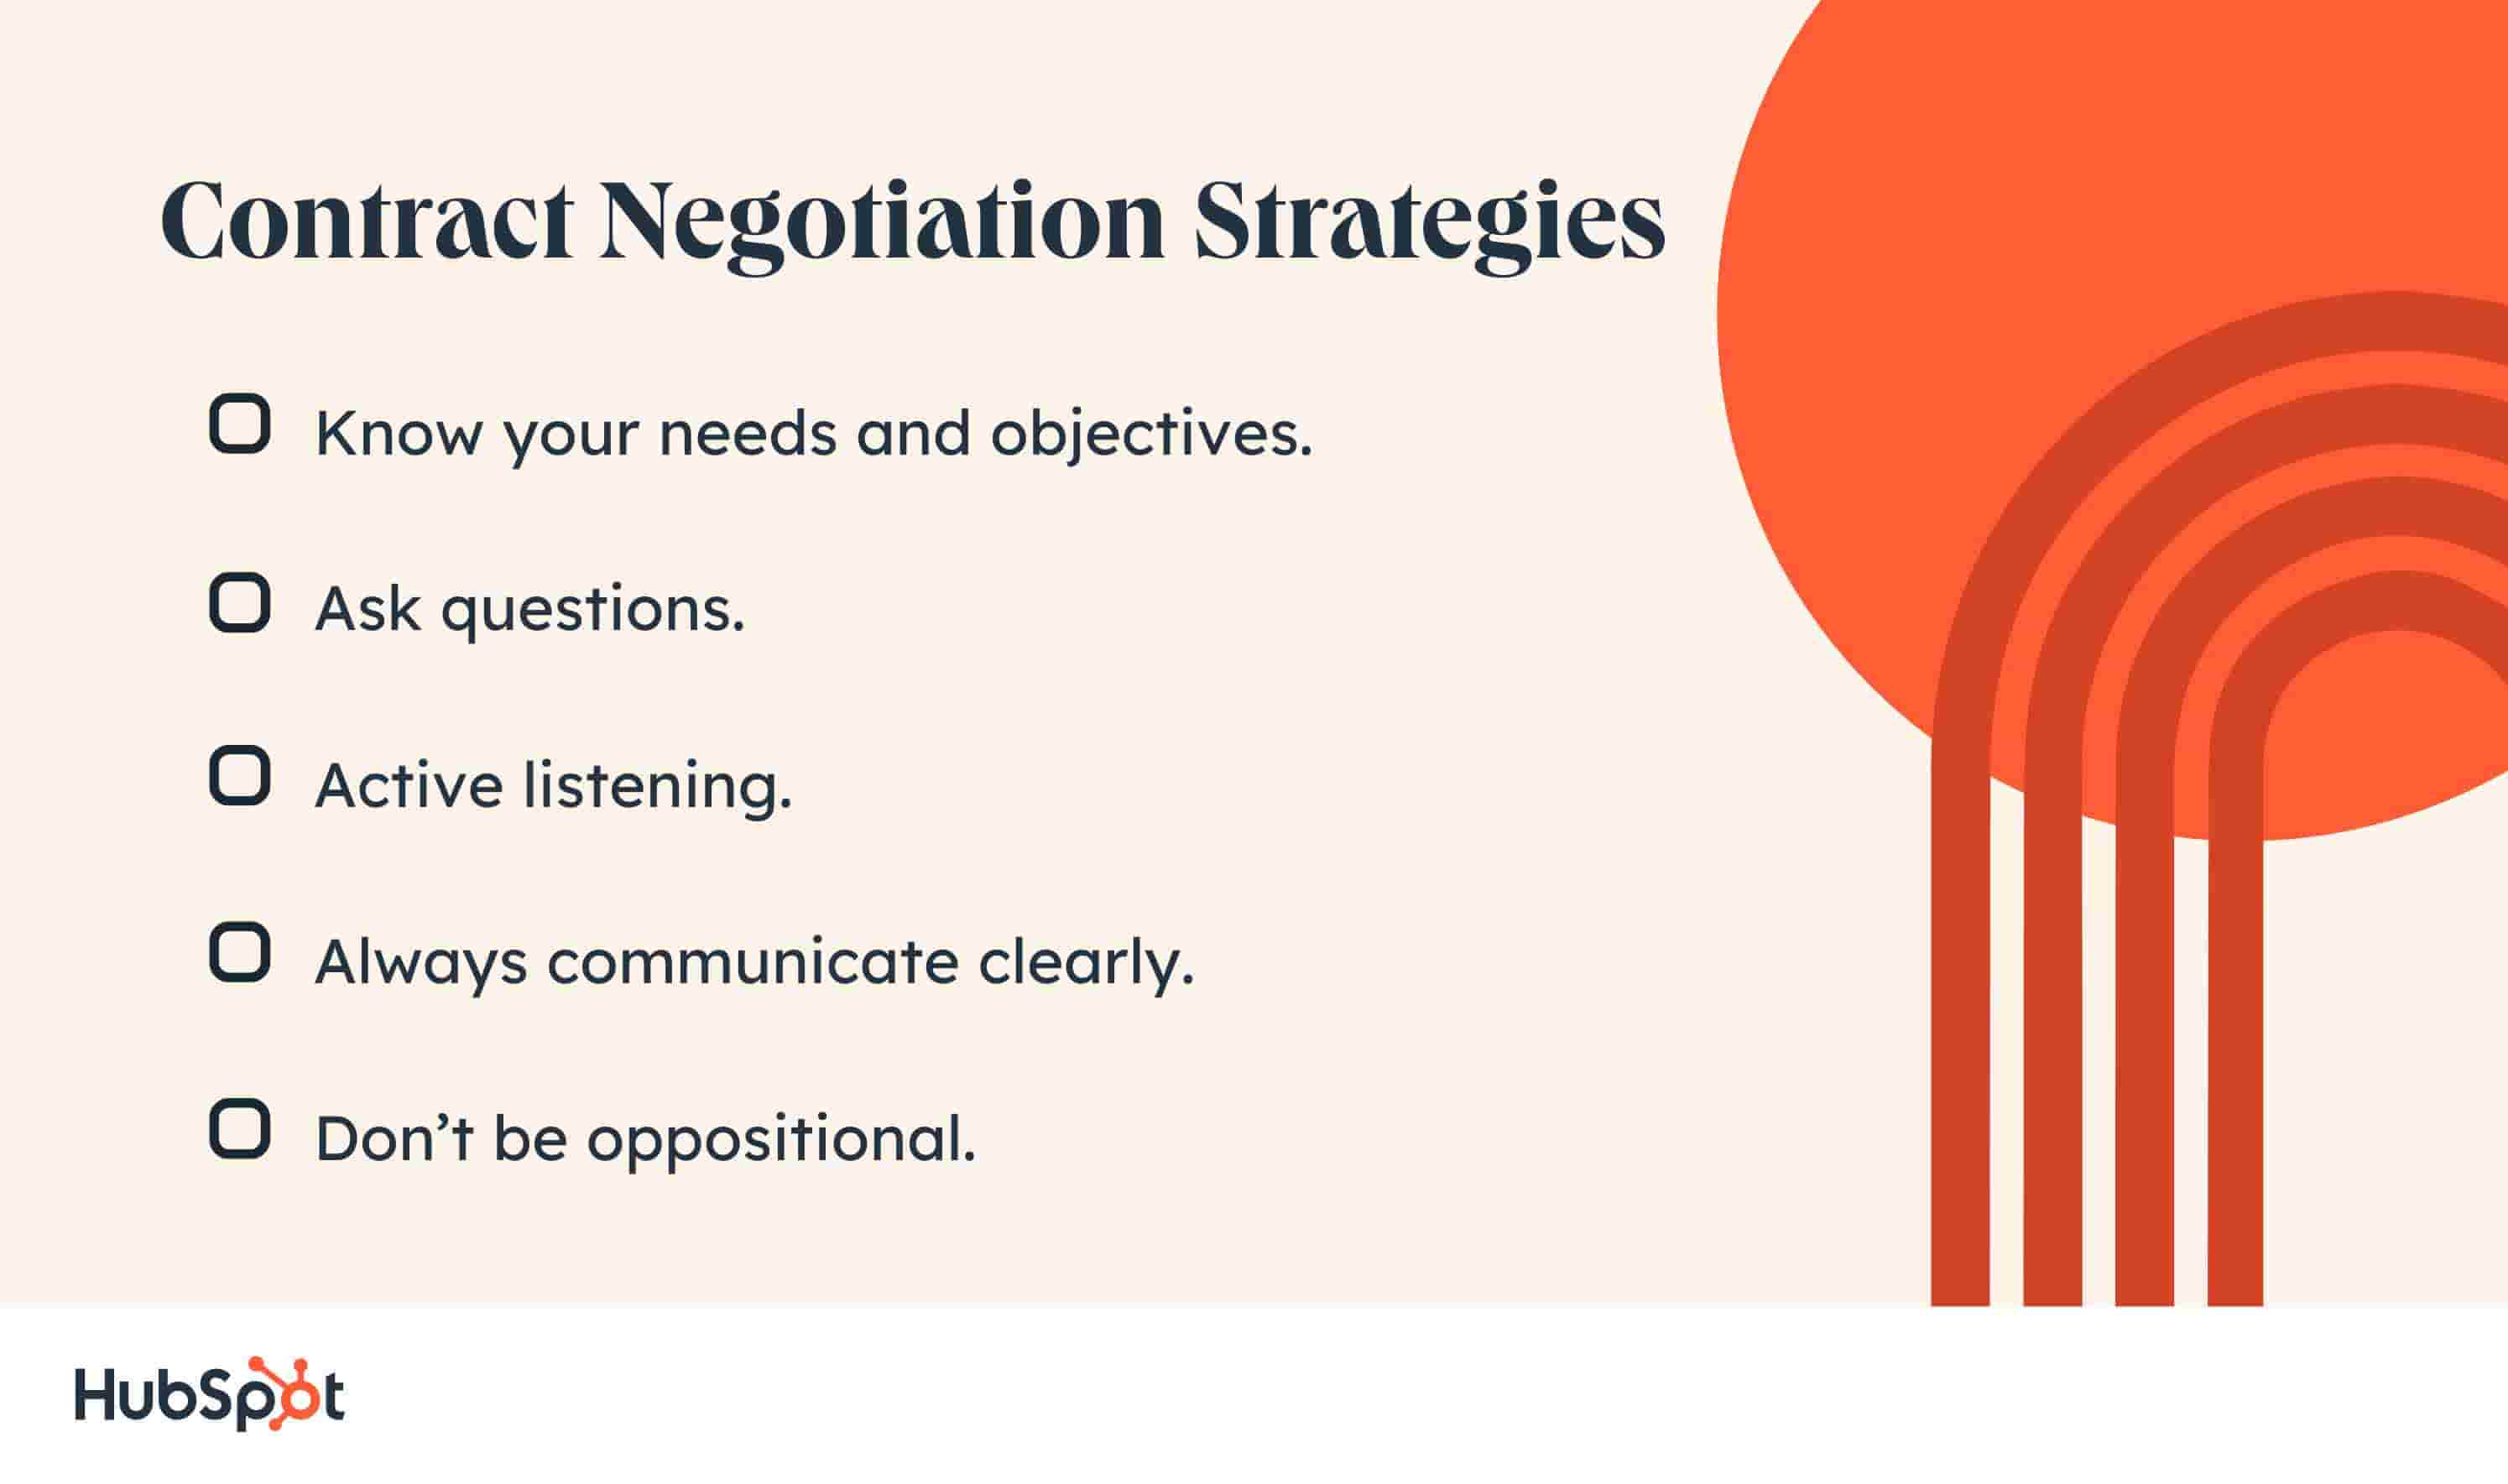 Contract Negotiation Strategies. Know your needs and objectives. Always communicate clearly. Ask questions. Active listening. Don’t be oppositional.